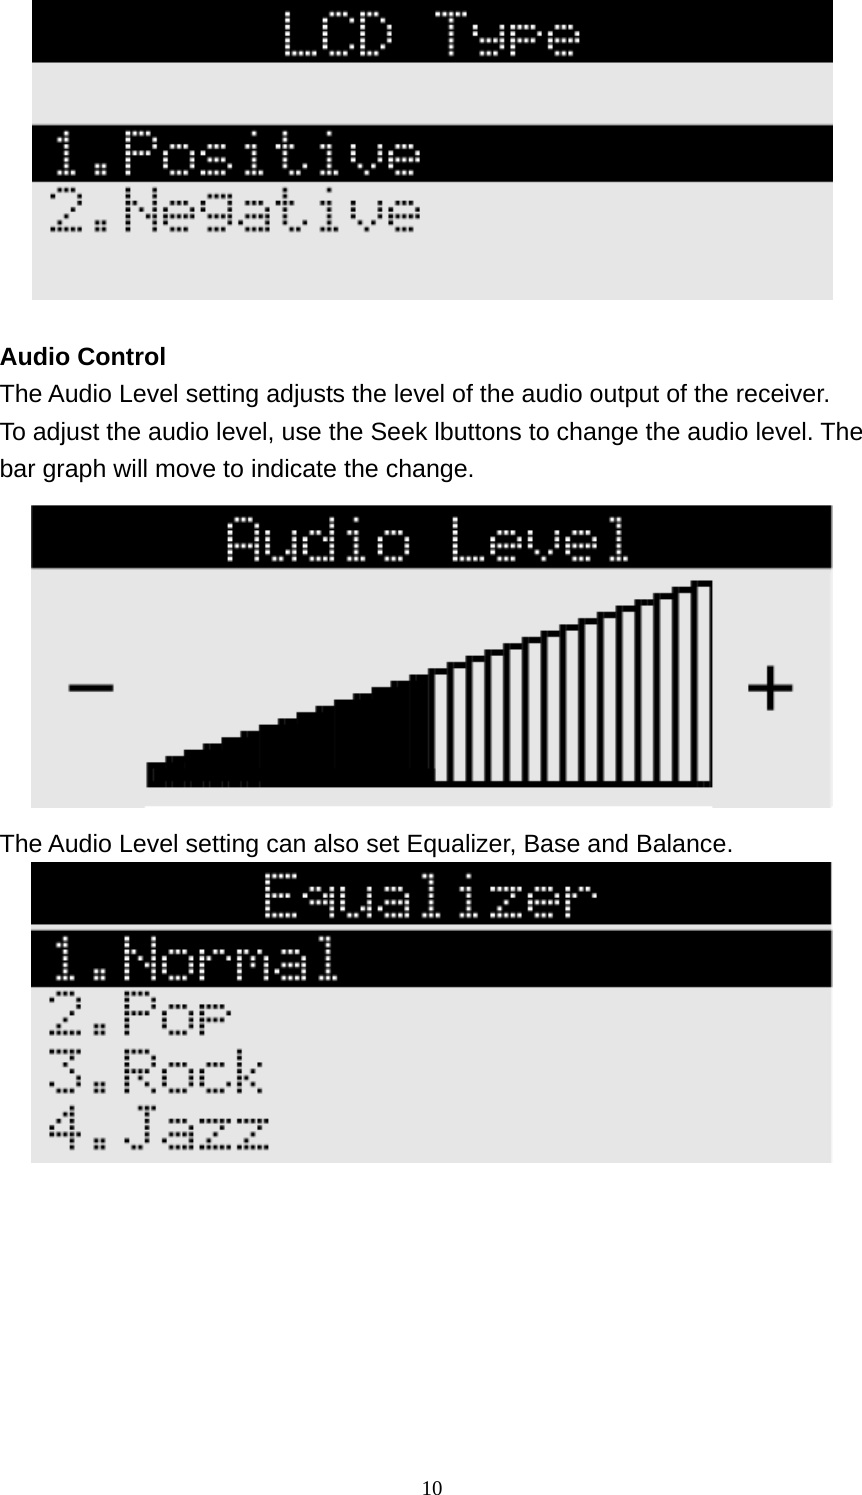  10  Audio Control The Audio Level setting adjusts the level of the audio output of the receiver. To adjust the audio level, use the Seek lbuttons to change the audio level. The bar graph will move to indicate the change.  The Audio Level setting can also set Equalizer, Base and Balance.   